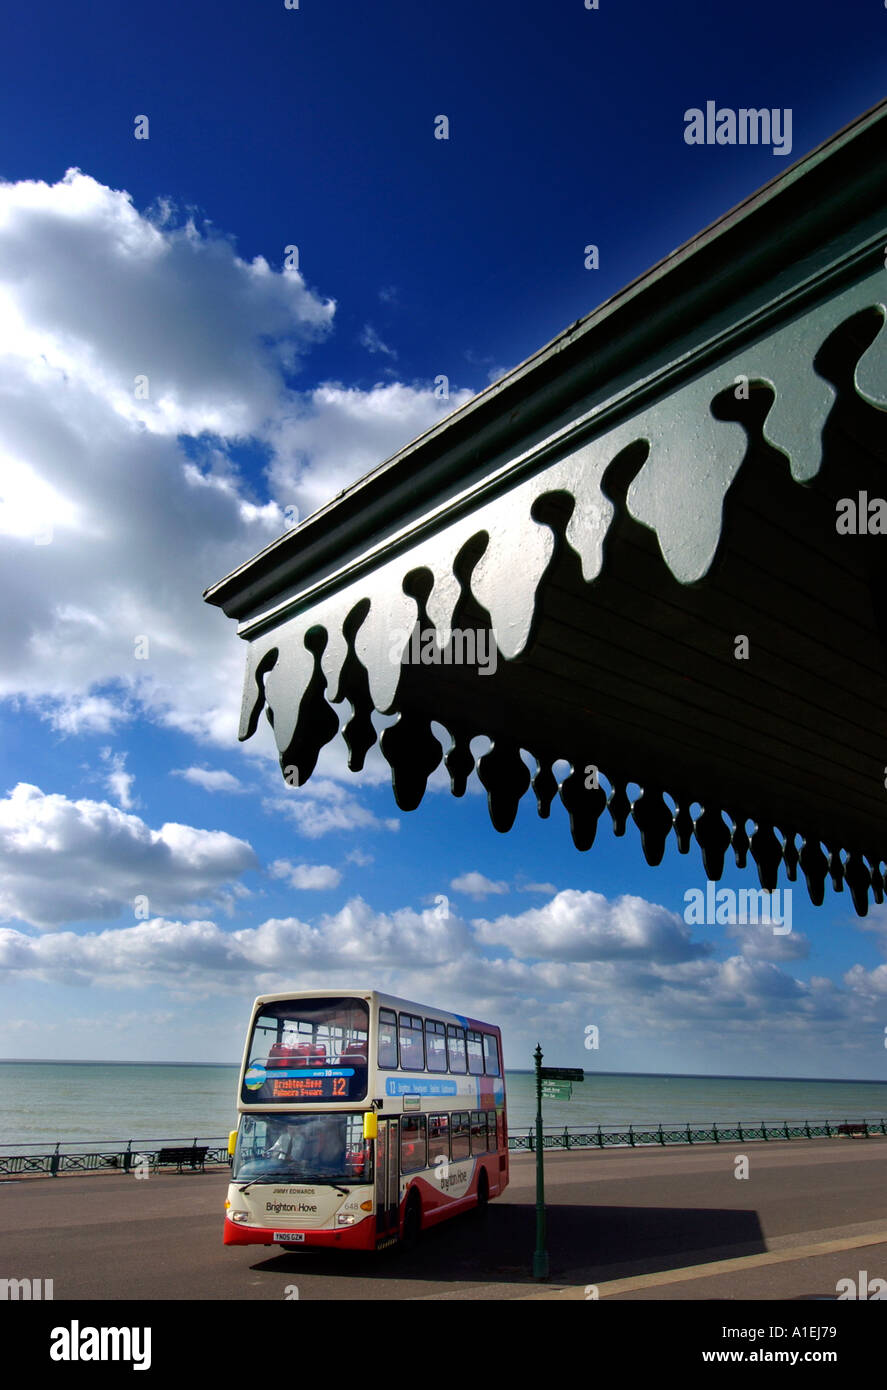 A traditional british double decker bus by the seaside on a summer day Stock Photo